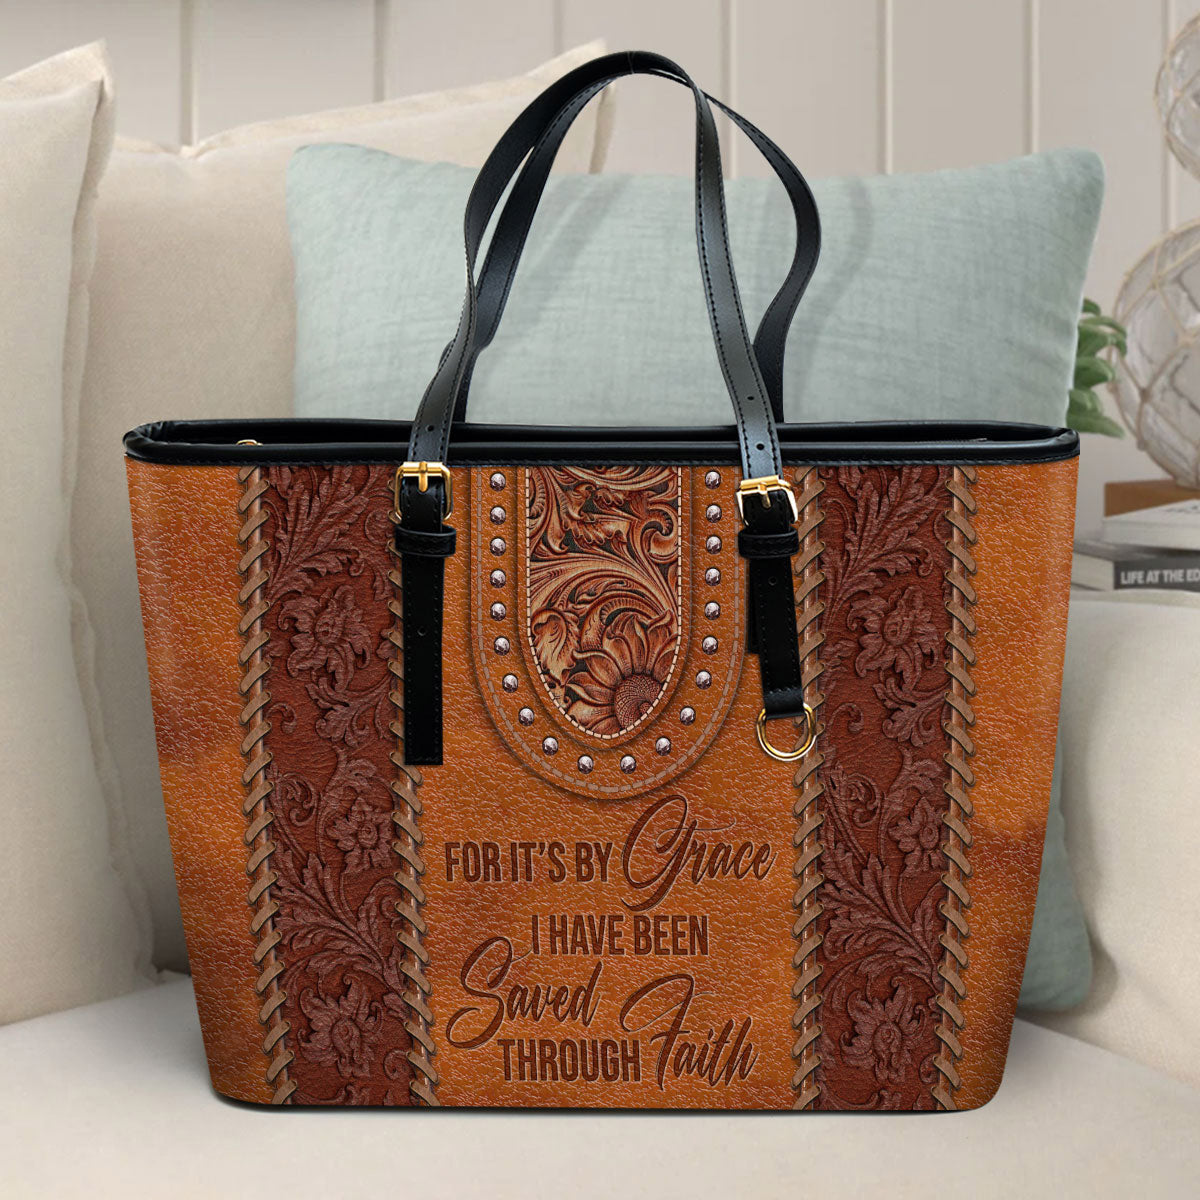 By Grace I Have Been Saved Through Faith Large Leather Tote Bag - Christ Gifts For Religious Women - Best Mother's Day Gifts